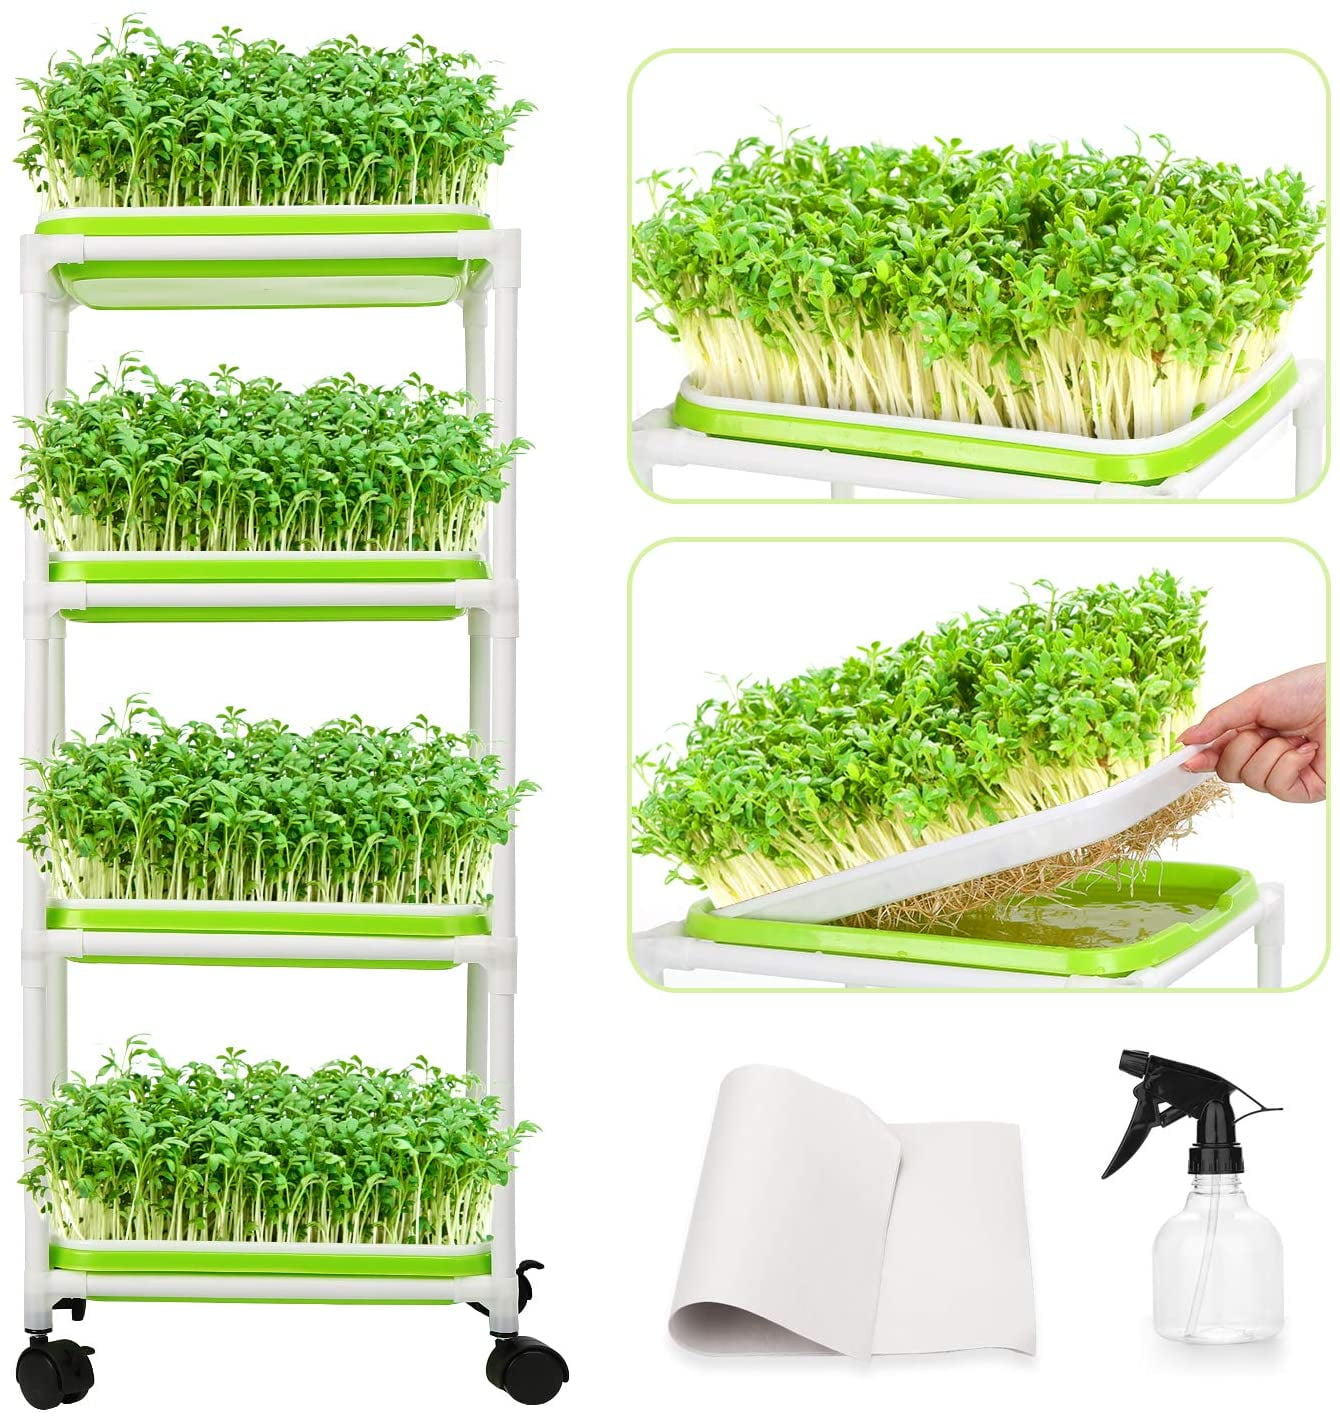 3Pcs Set Plant Tray Household Plant Sprouter Wheatgrass Grower Plant Tray 